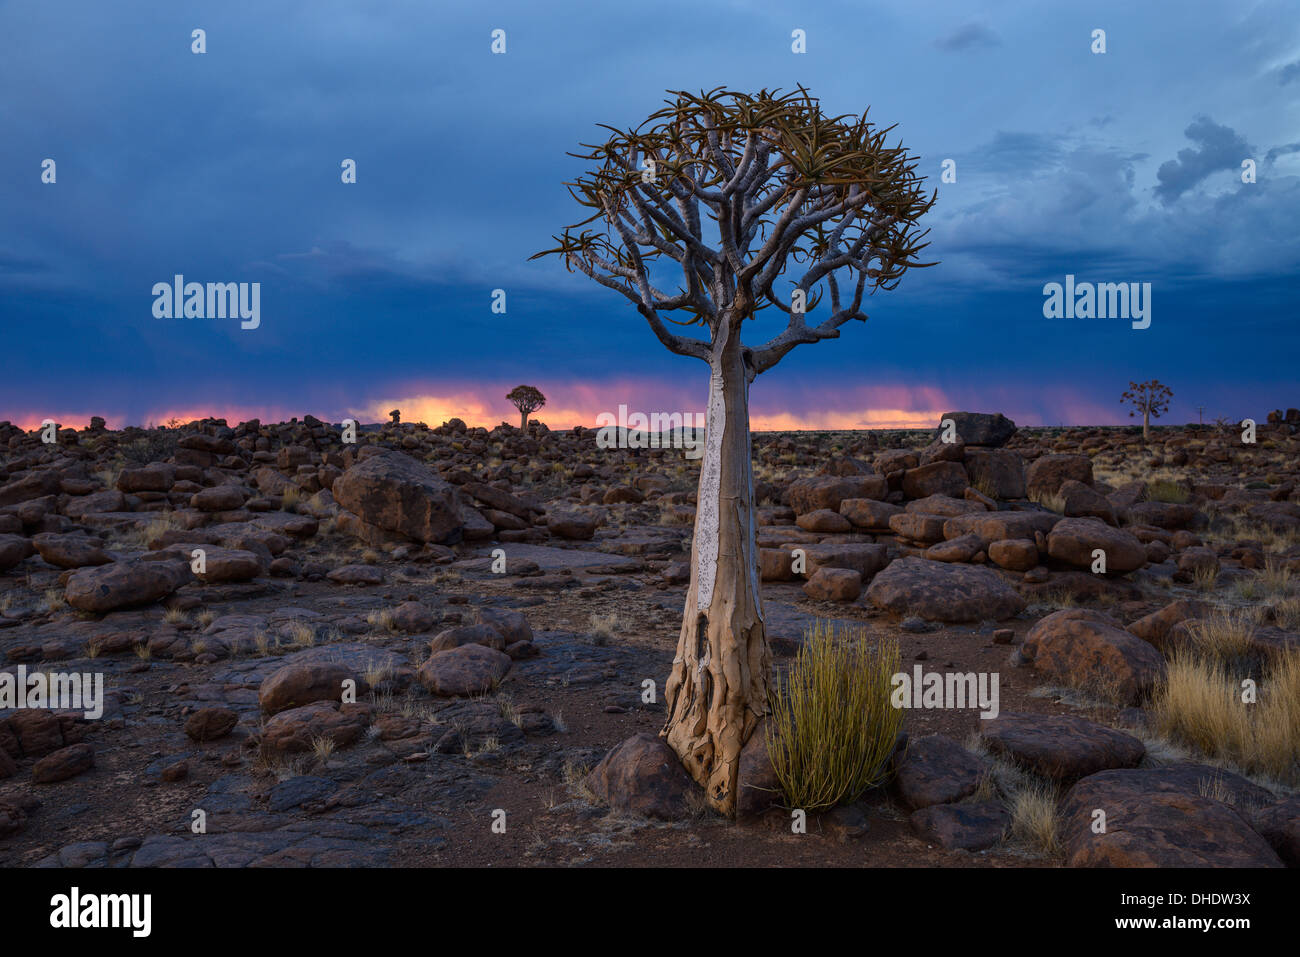 Quiver trees (kokerboom) and boulders against a fiery and stormy sky in the Giant's Playground, Keetmanshoop, Namibia, Africa Stock Photo